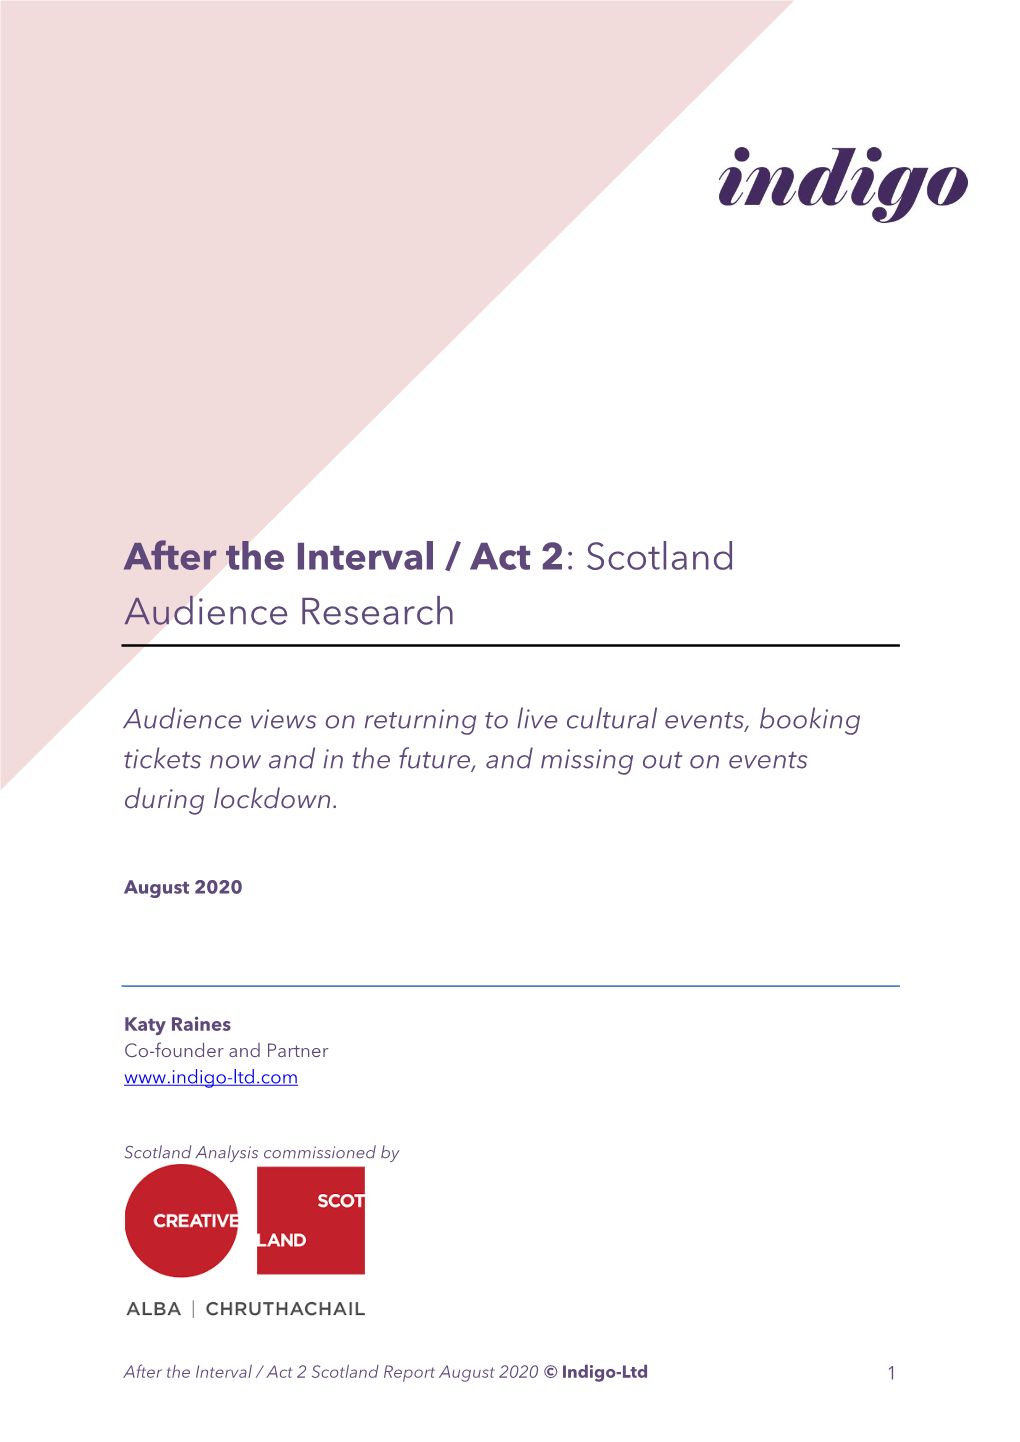 After the Interval / Act 2: Scotland Audience Research